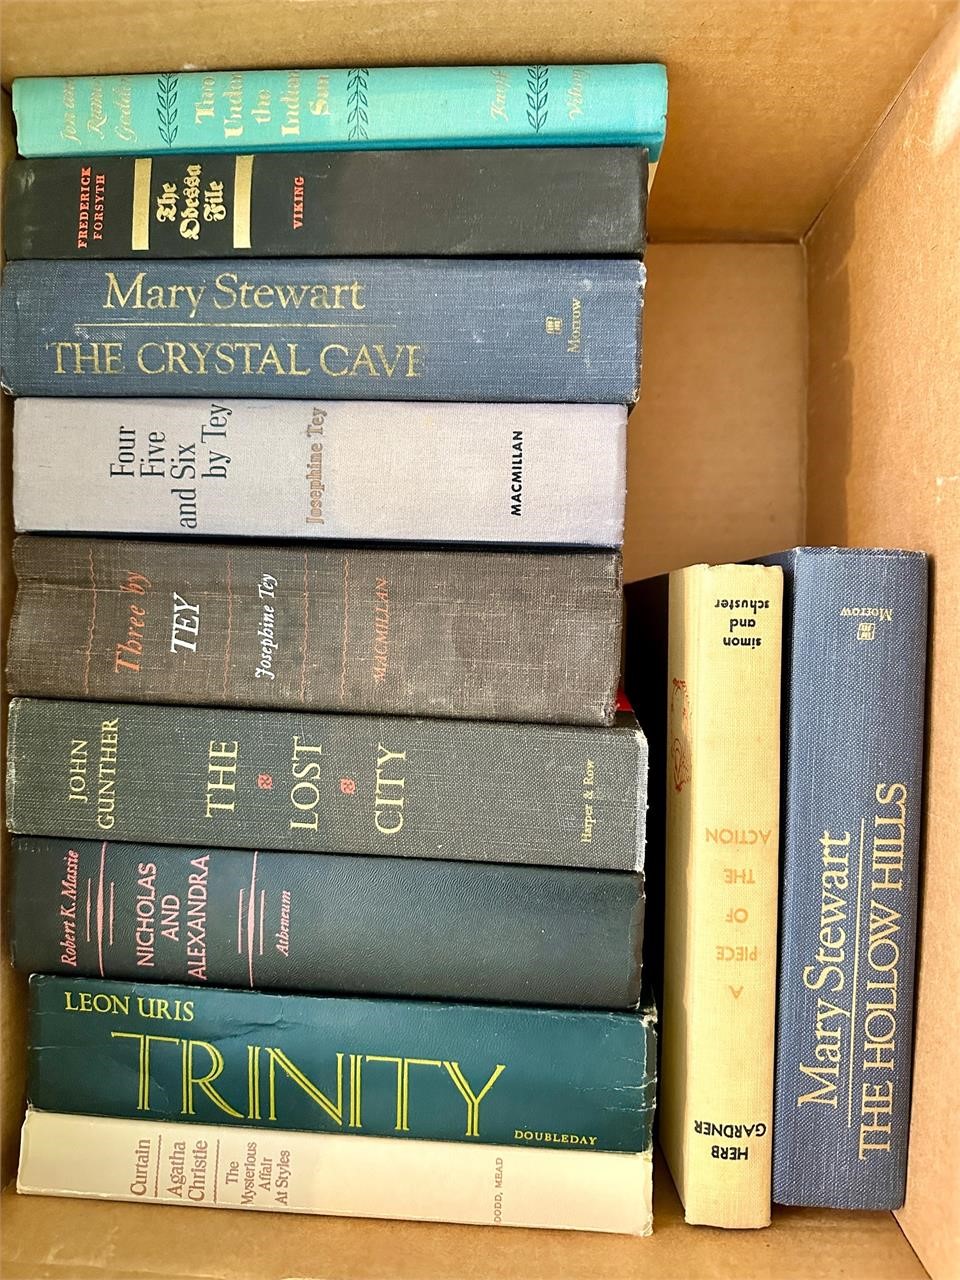 Lot of Vintage Hardcover Books